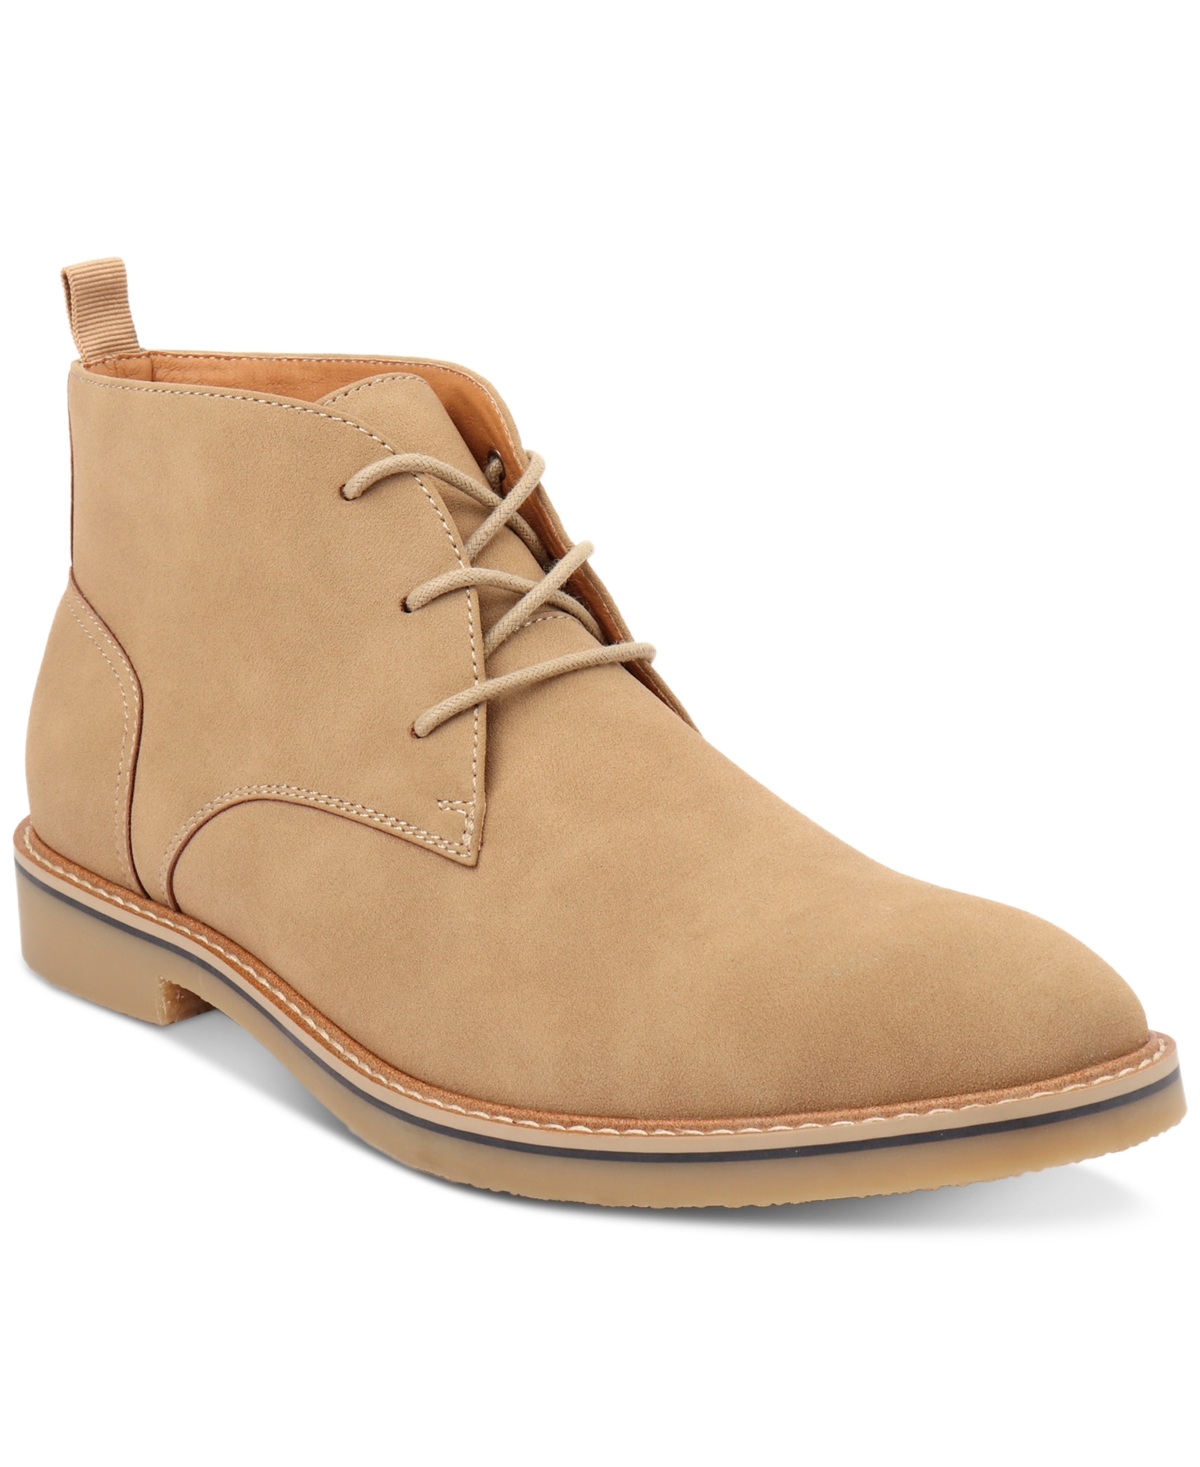 Men's Nathan Faux-Leather Lace-Up Chukka Boots, Created for Macy's - Tan